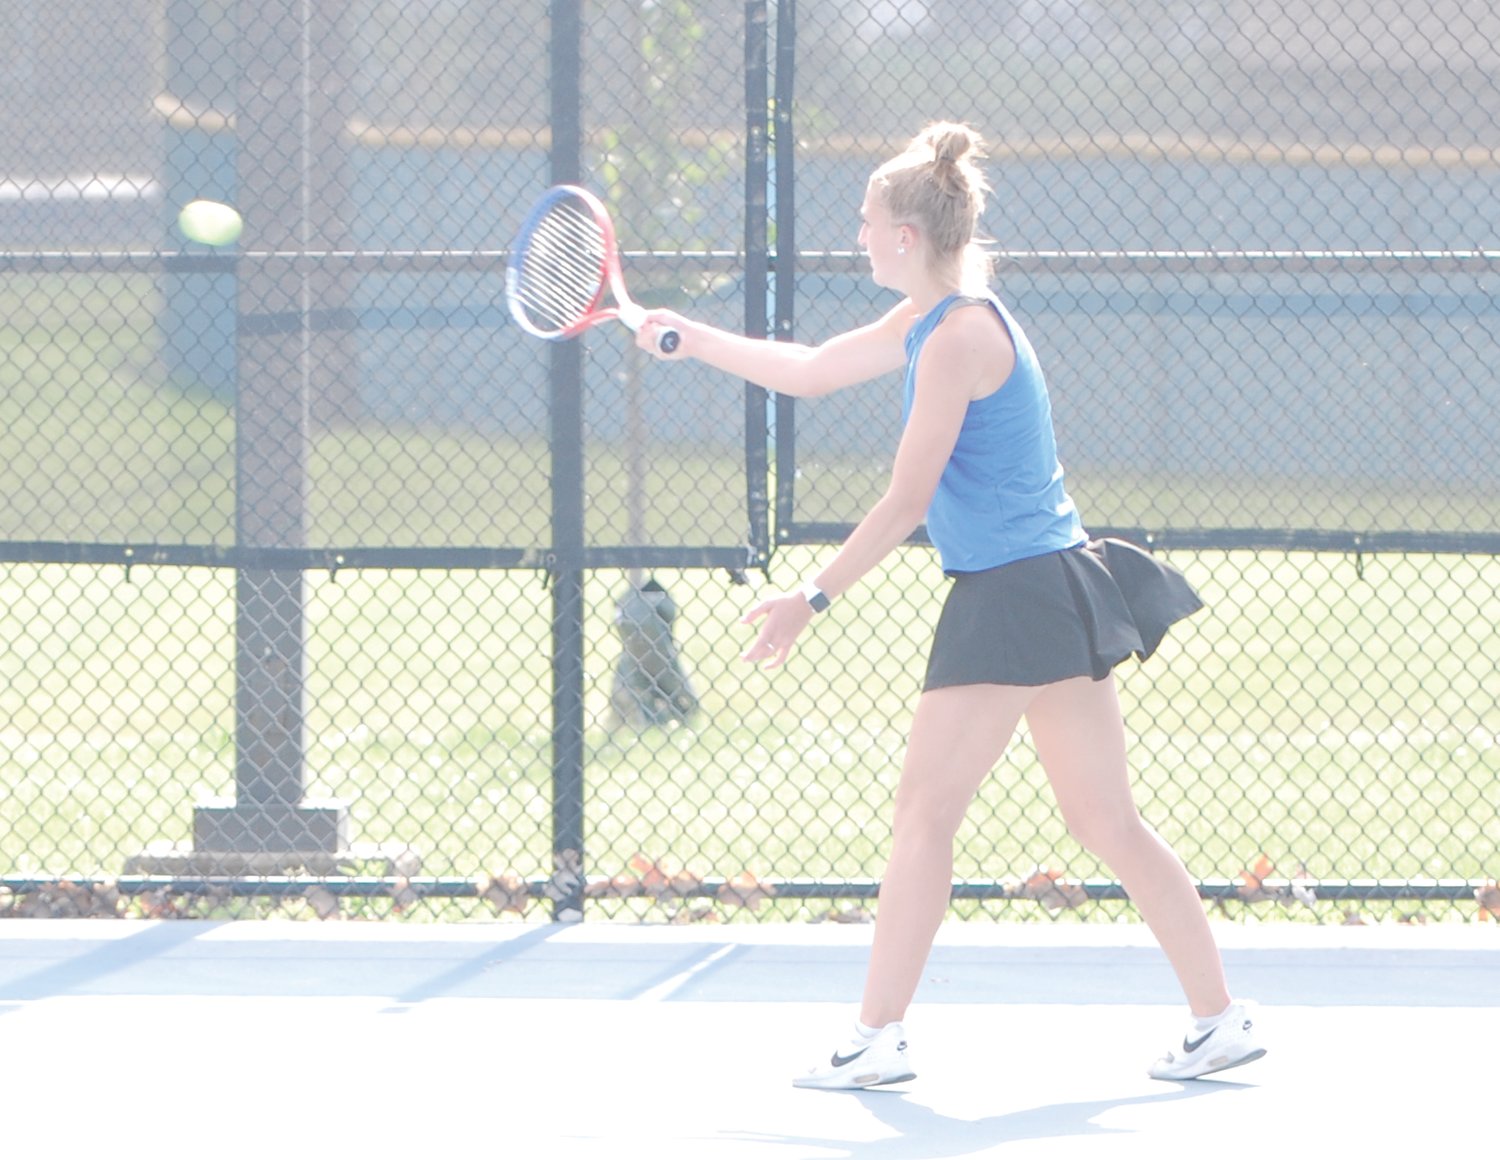 Crawfordsville sophomore Elyse Widmer and teammate Lilly Klingbeil clinched a three-set win over Covington at No. 2 doubles.